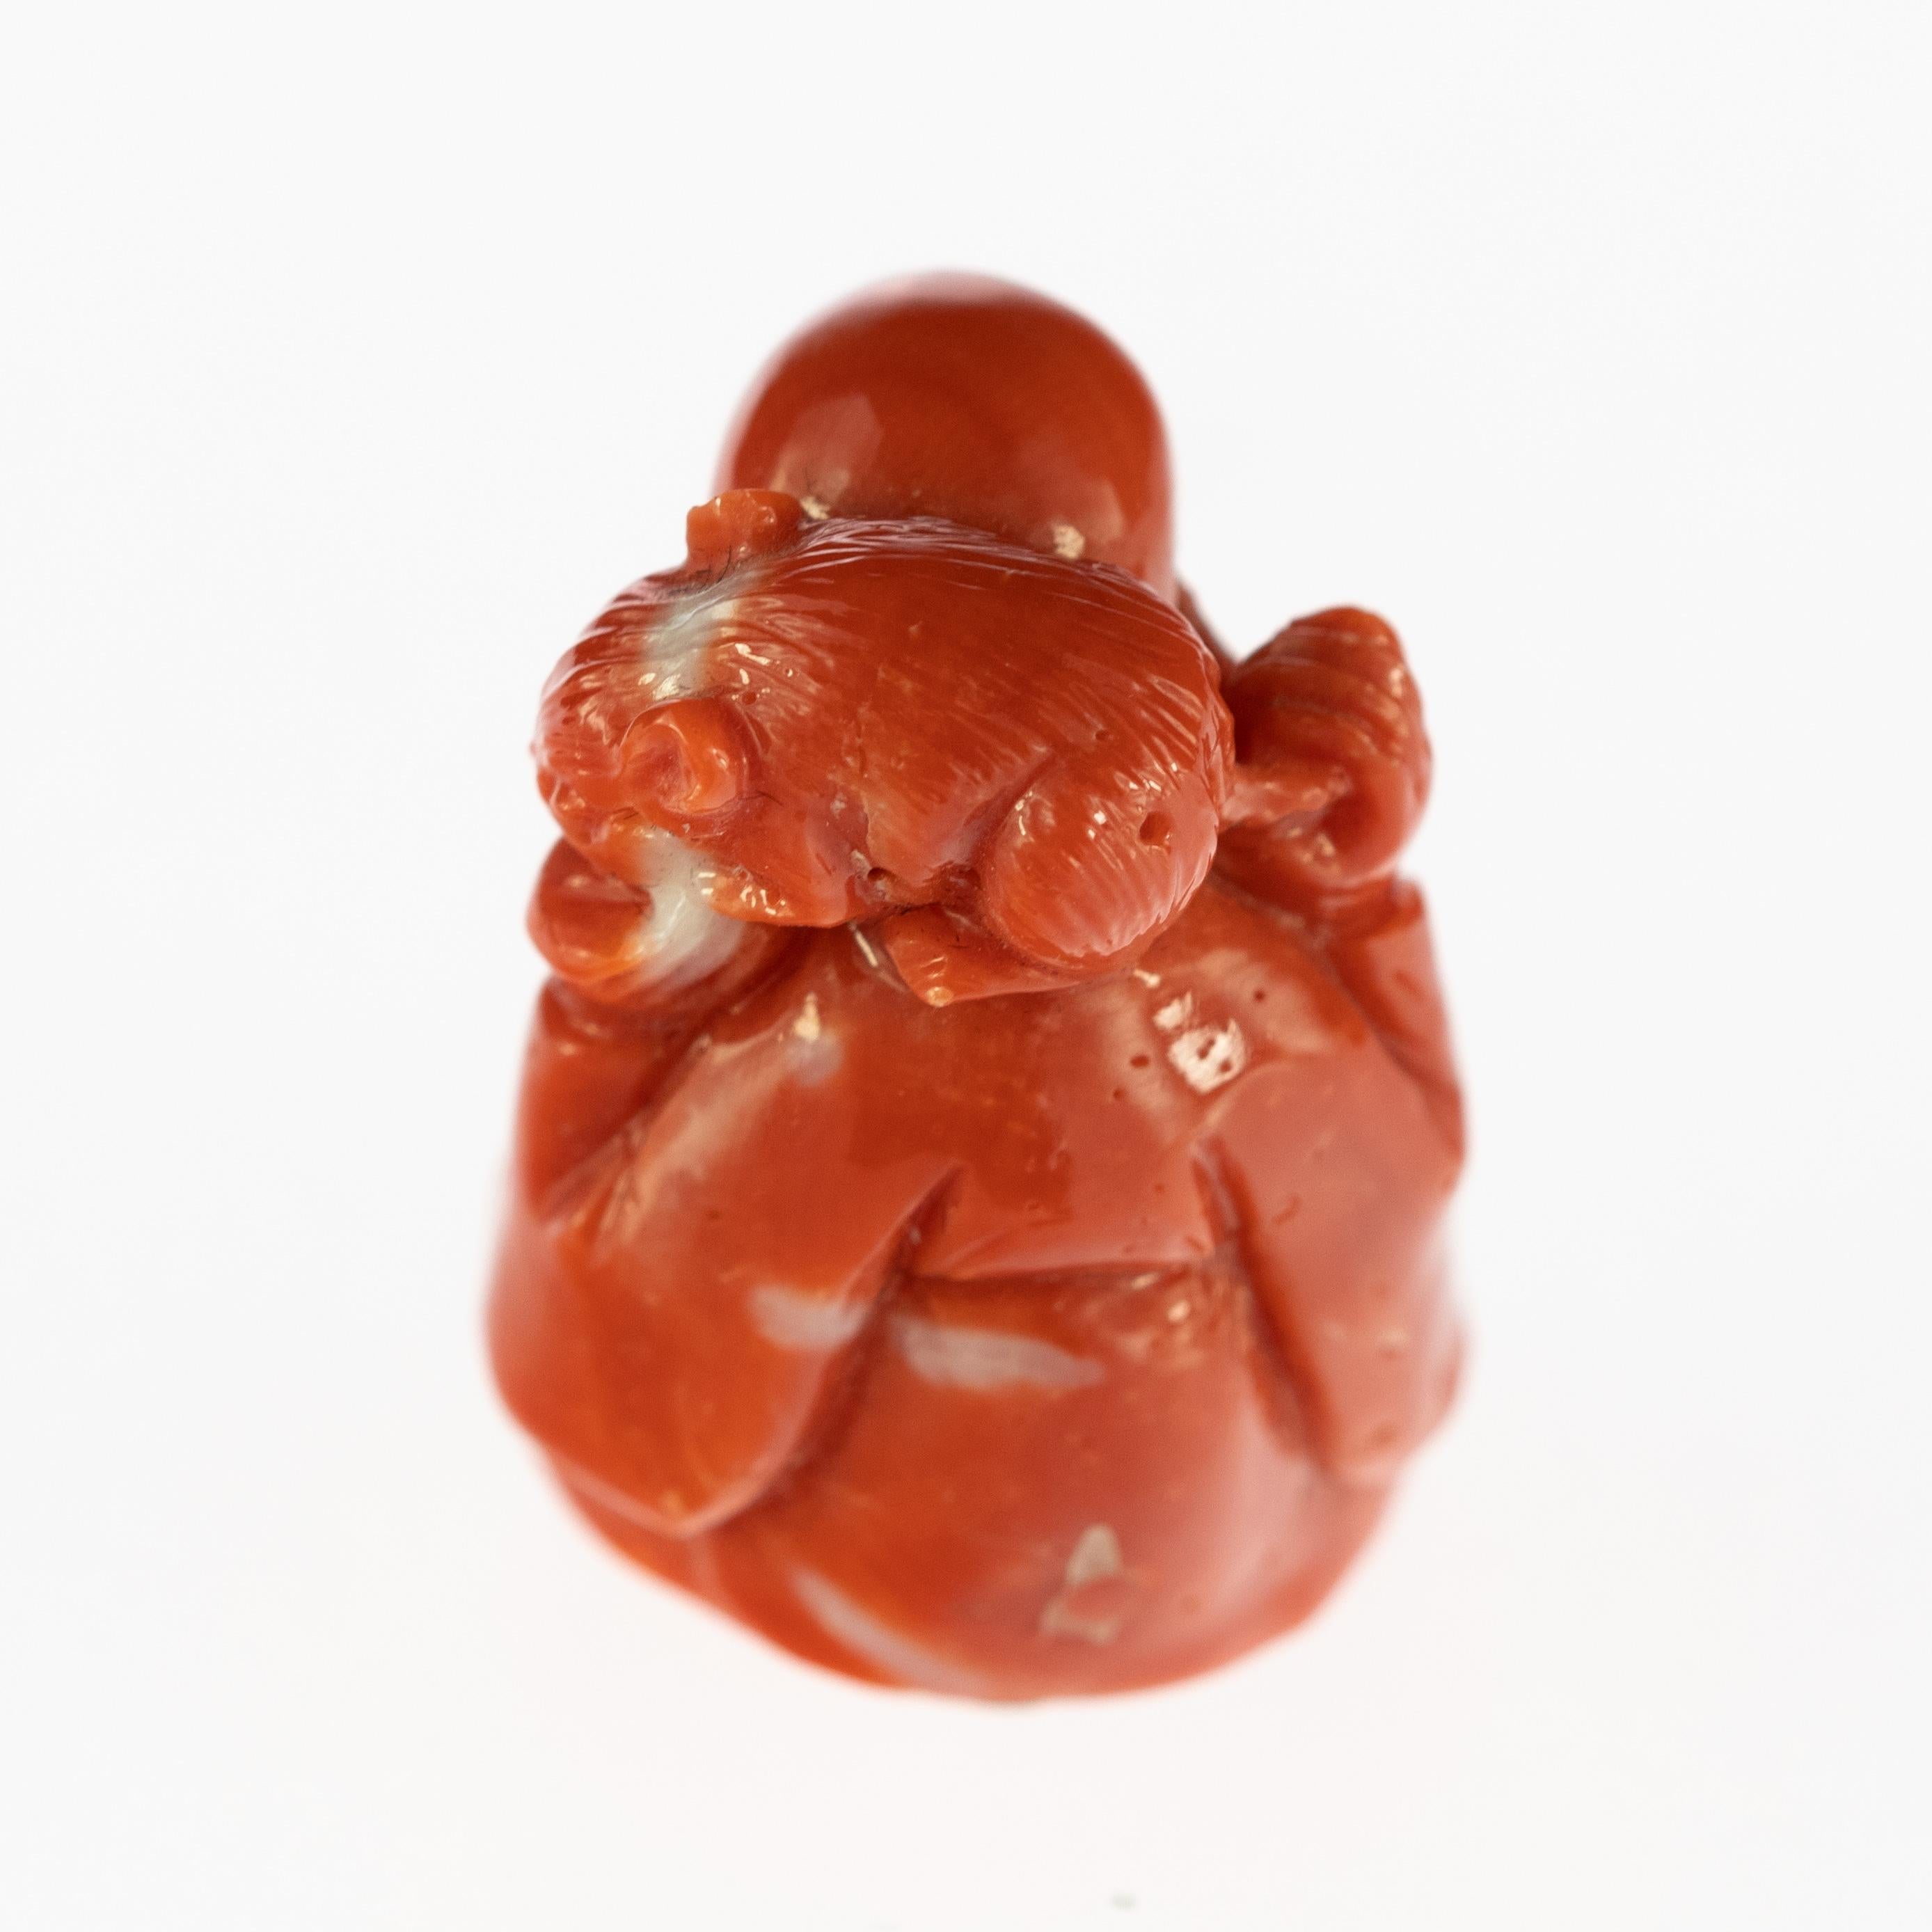 Taiwanese Chinese Red Coral Monk Hand Carved Asian Art Taiwan Statue Sculpture